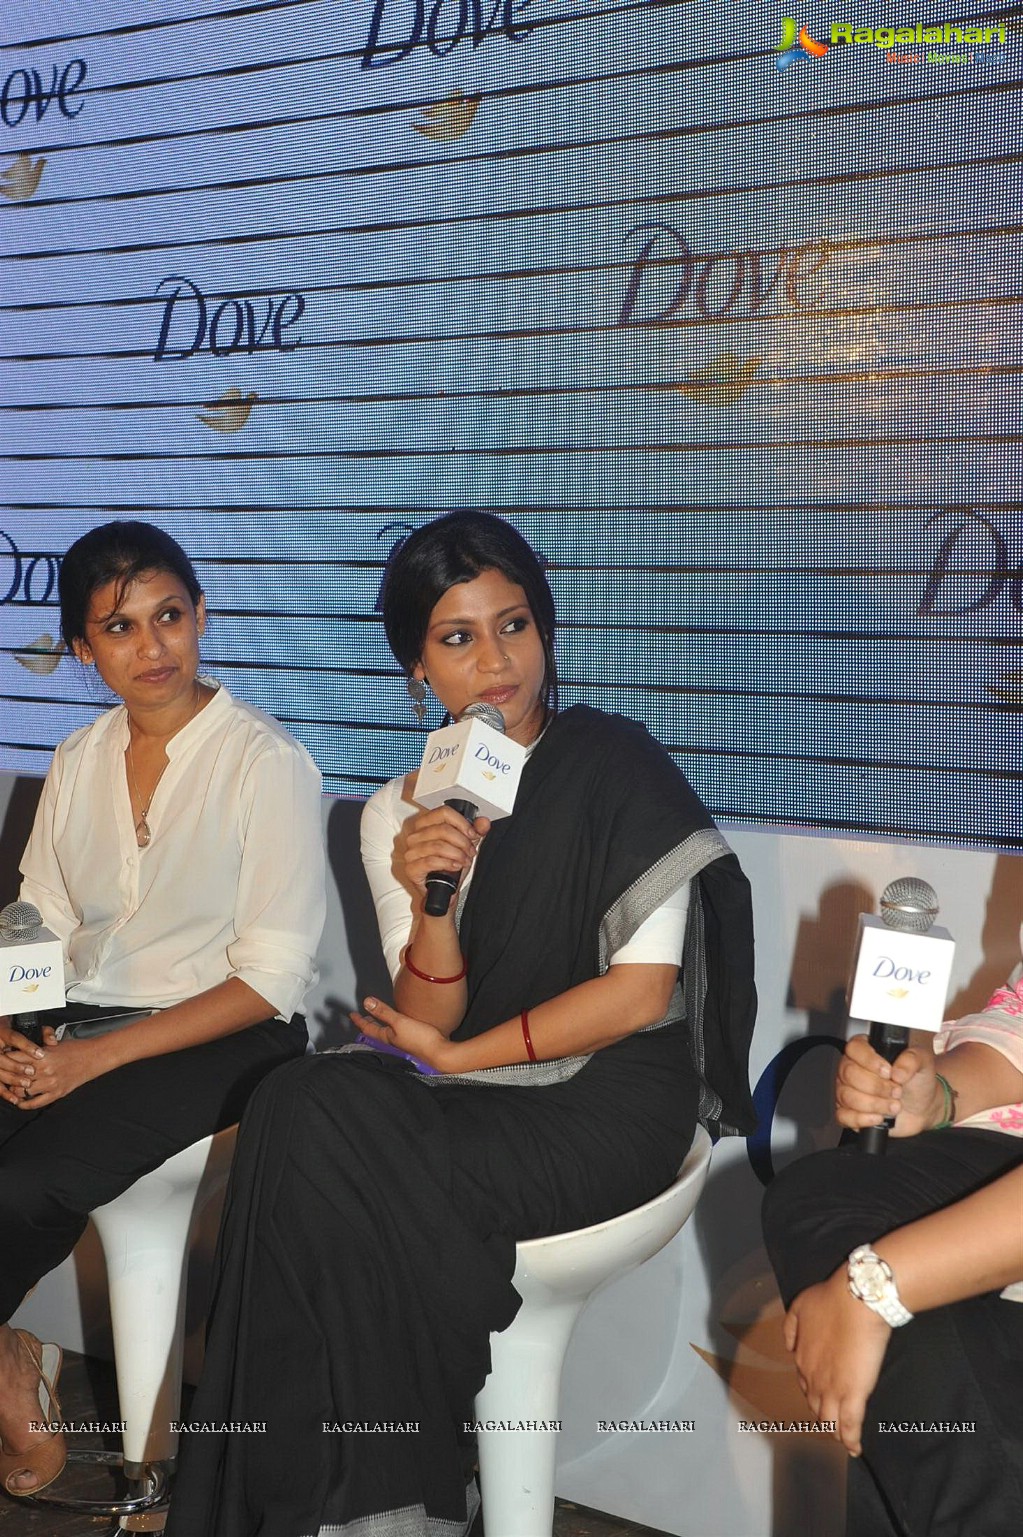 Konkona Sen Sharma at the Dove Beauty Patch Experiment Panel Discussion